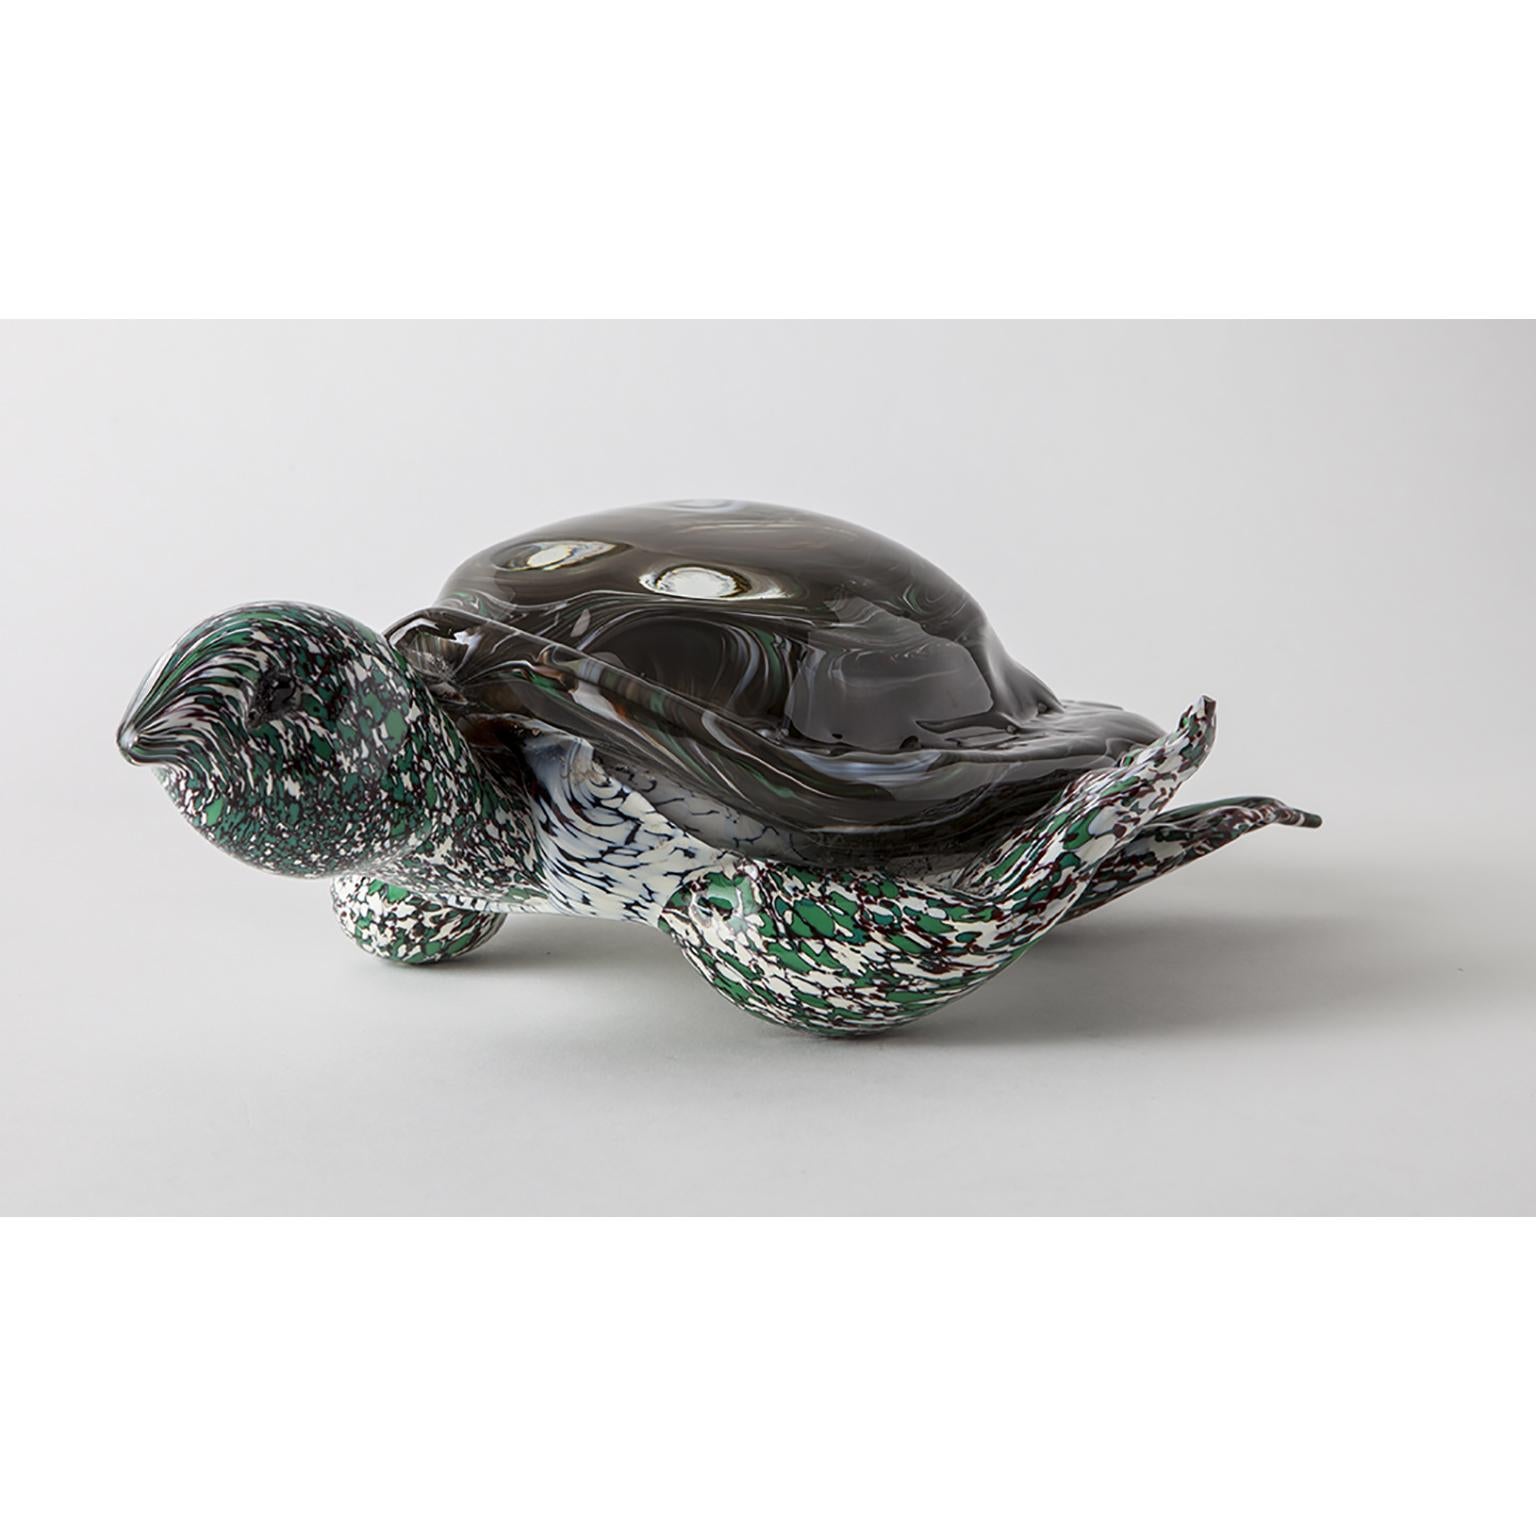 Immerse yourself in the beauty of our modern artistic aquatic turtle sculpture, entirely handmade with precision in authentic Murano glass. Each exquisite detail is meticulously crafted by skilled artisans, ensuring a unique and stunning